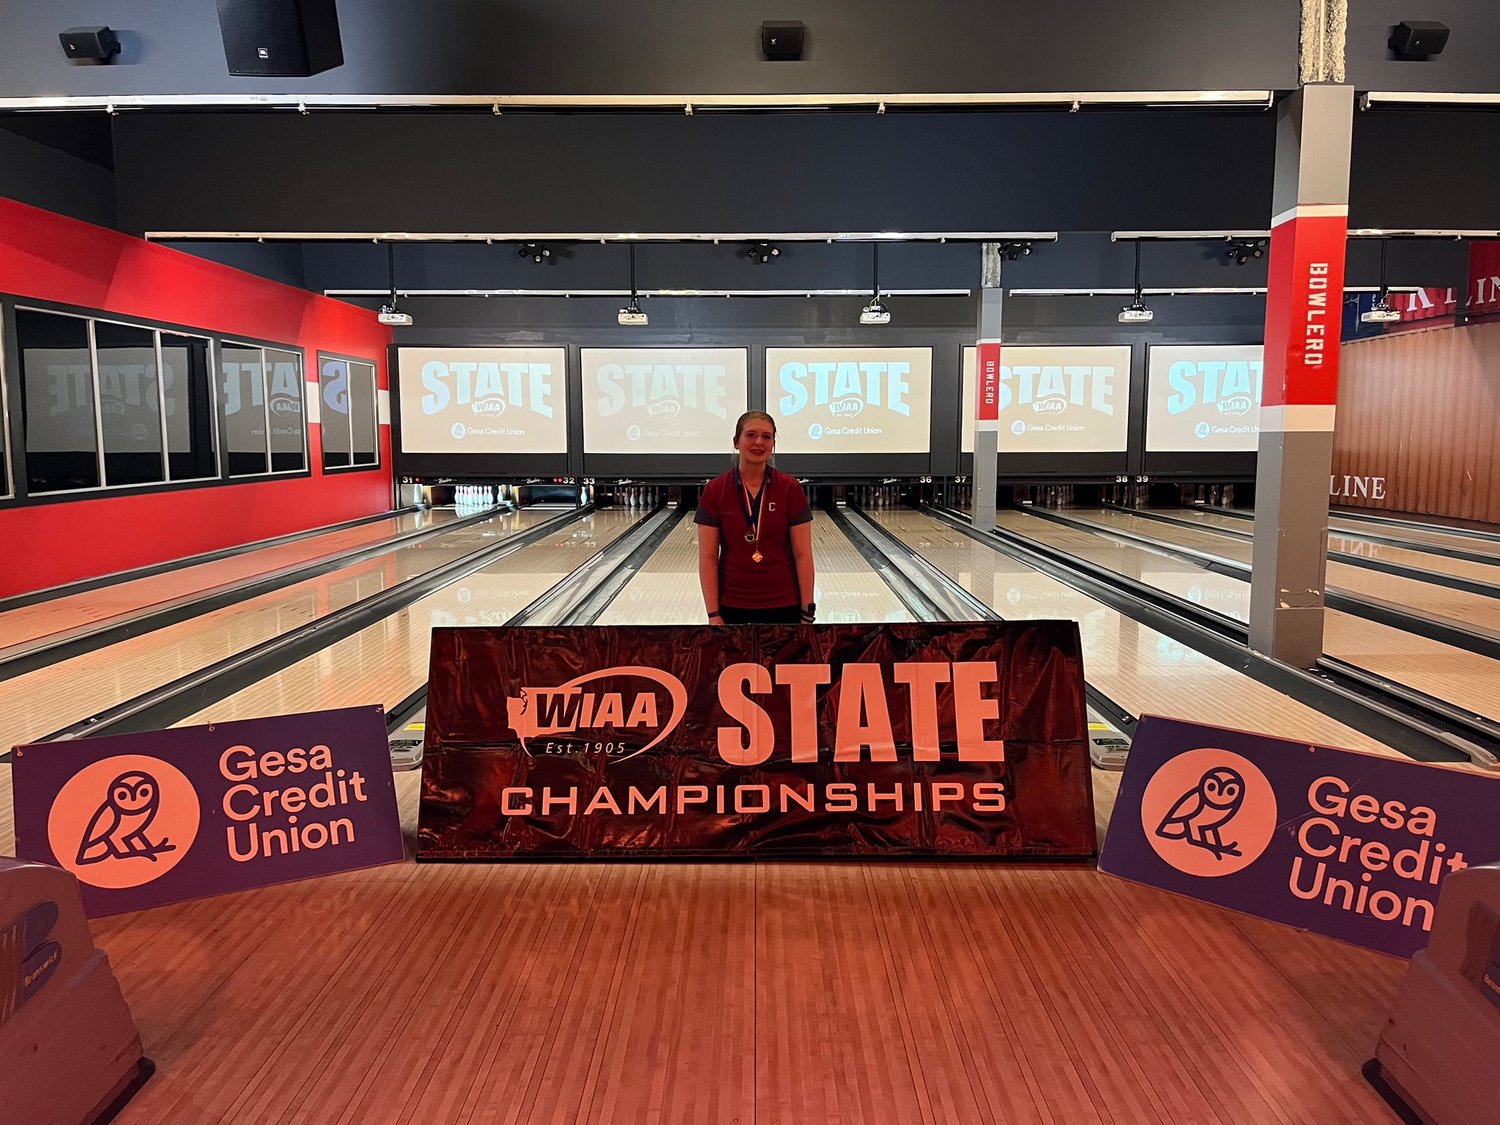 Led by the individual dominance of Piper Chalmers, and another well-rounded team effort in the Baker games, the W.F. West girls bowling team took home a team state championship Saturday afternoon at Bowlero in Tukwila, a day after Chalmers won the individual state title Friday night.